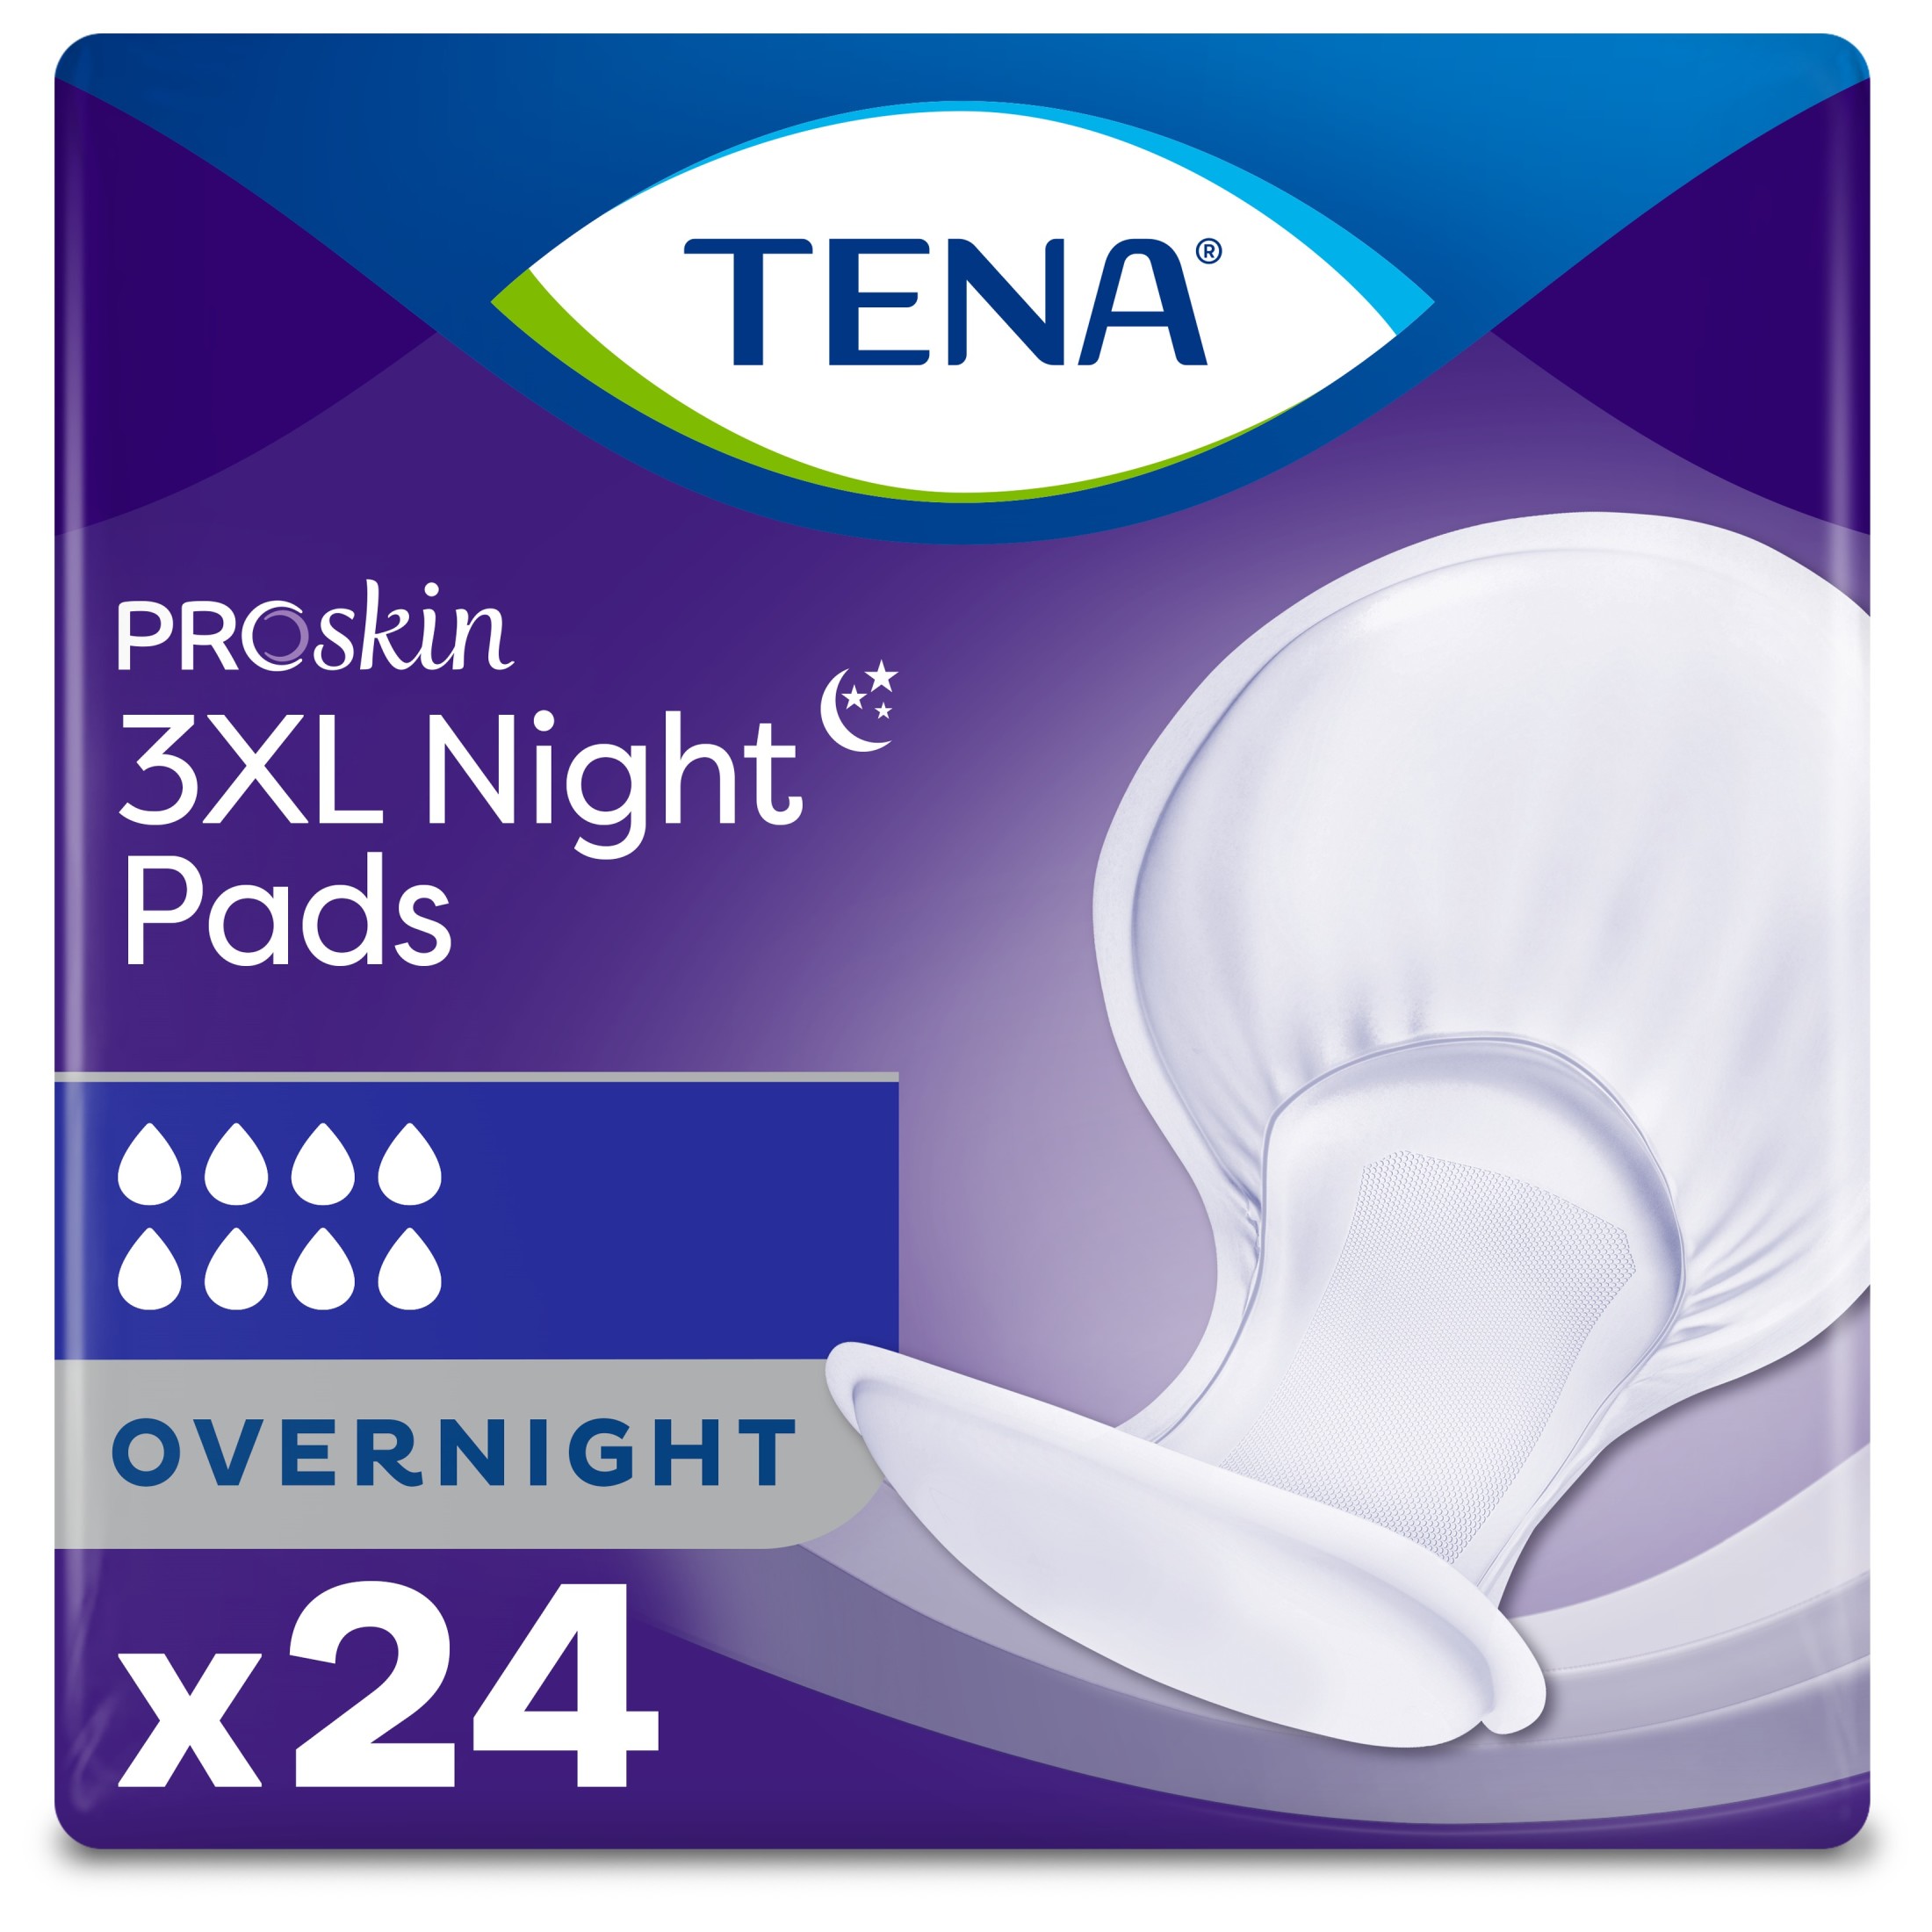 Tena ProSkin 3XL Incontinence Pads, Overnight Absorbency, 24 Ct - image 1 of 13